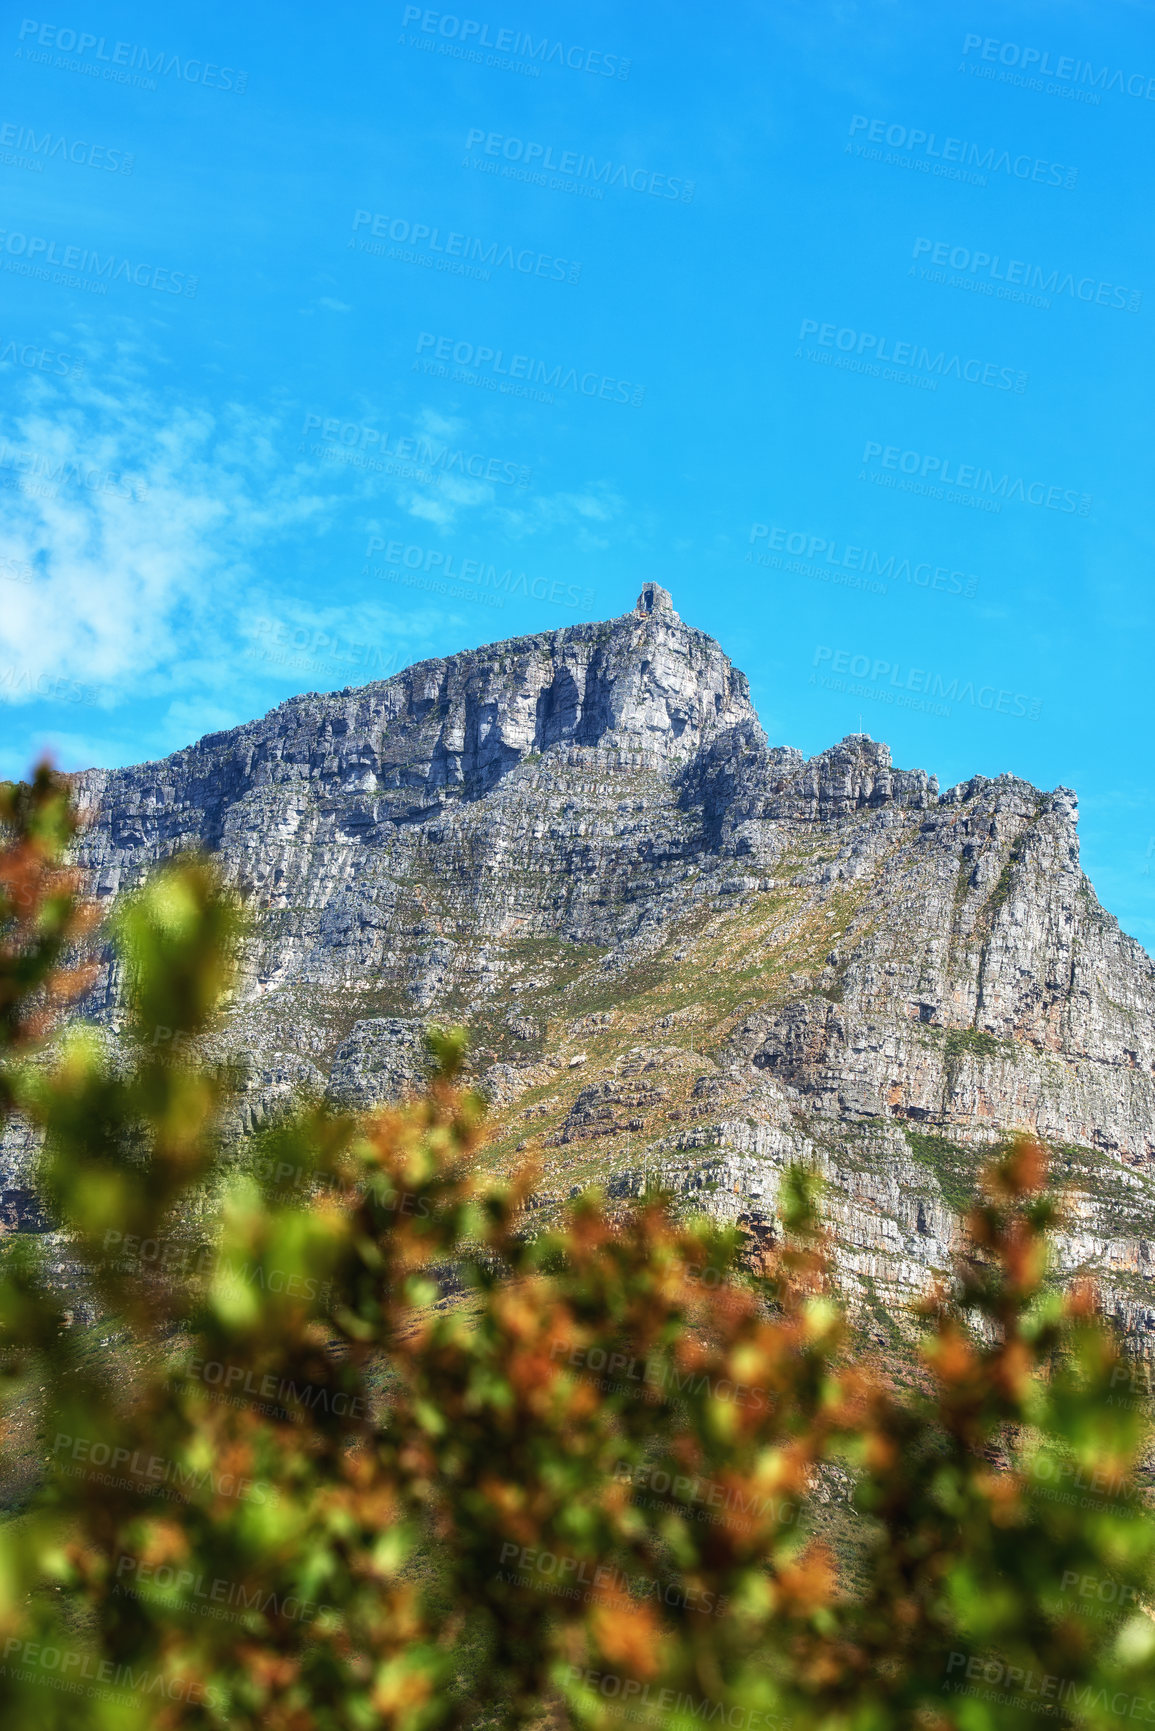 Buy stock photo Landscape of a mountain and plants against a blue sky with copy space. A popular travel destination for tourists and hikers to explore. Relaxing view of Table Mountain in Cape Town, Western Cape